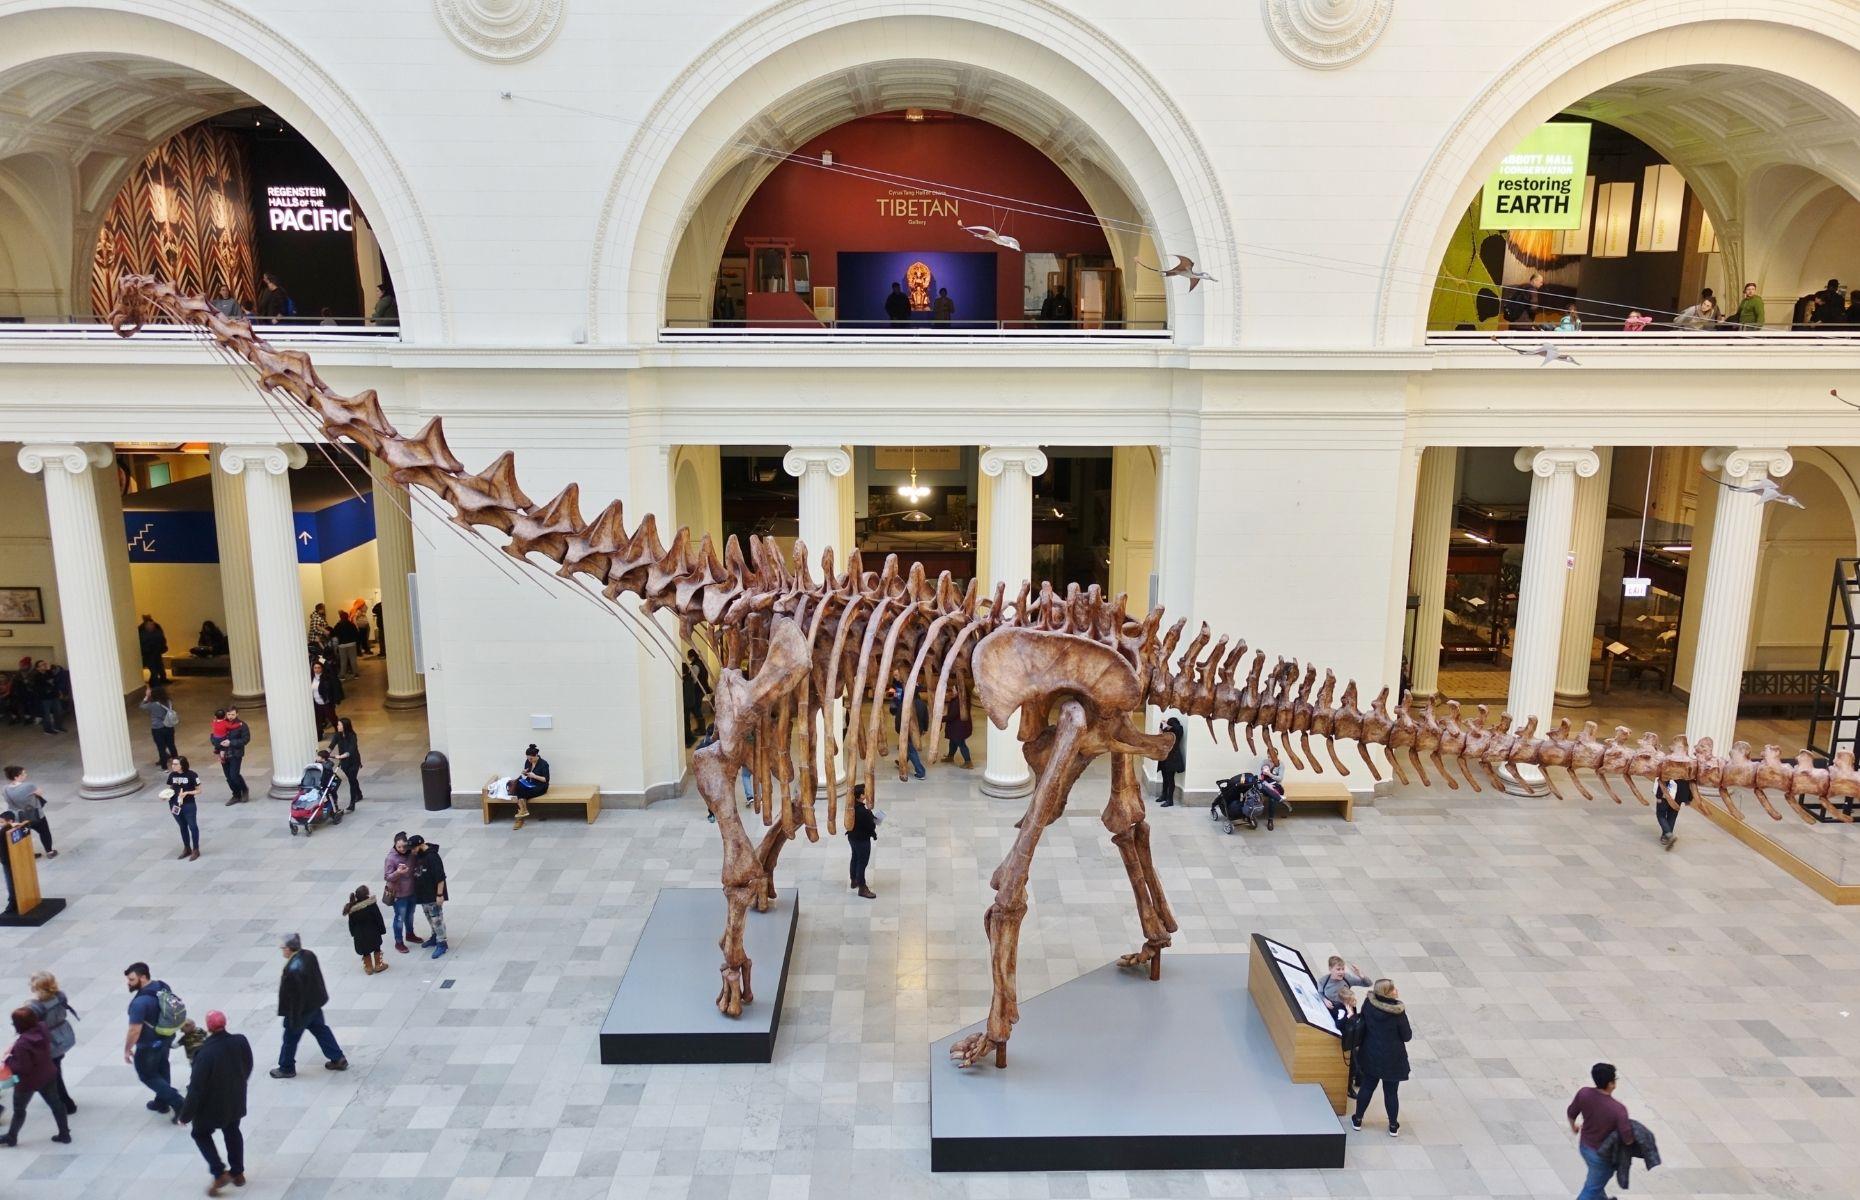 <p>Chicago’s <a href="https://www.fieldmuseum.org/">Field Museum</a> is home to the largest dinosaur discovered to date, the titanosaur Patagotitan mayorum. Named Máximo, the dino is 122 feet long (37m) and would have weighed more than 10 African elephants. Other highlights include the fossil skeleton of a 42-foot-long (13m) T. rex named SUE and Illinois’ state fossil, the Tully monster. From talks with real paleontologists to otherworldly dinosaur bones, this museum has something for everyone.</p>